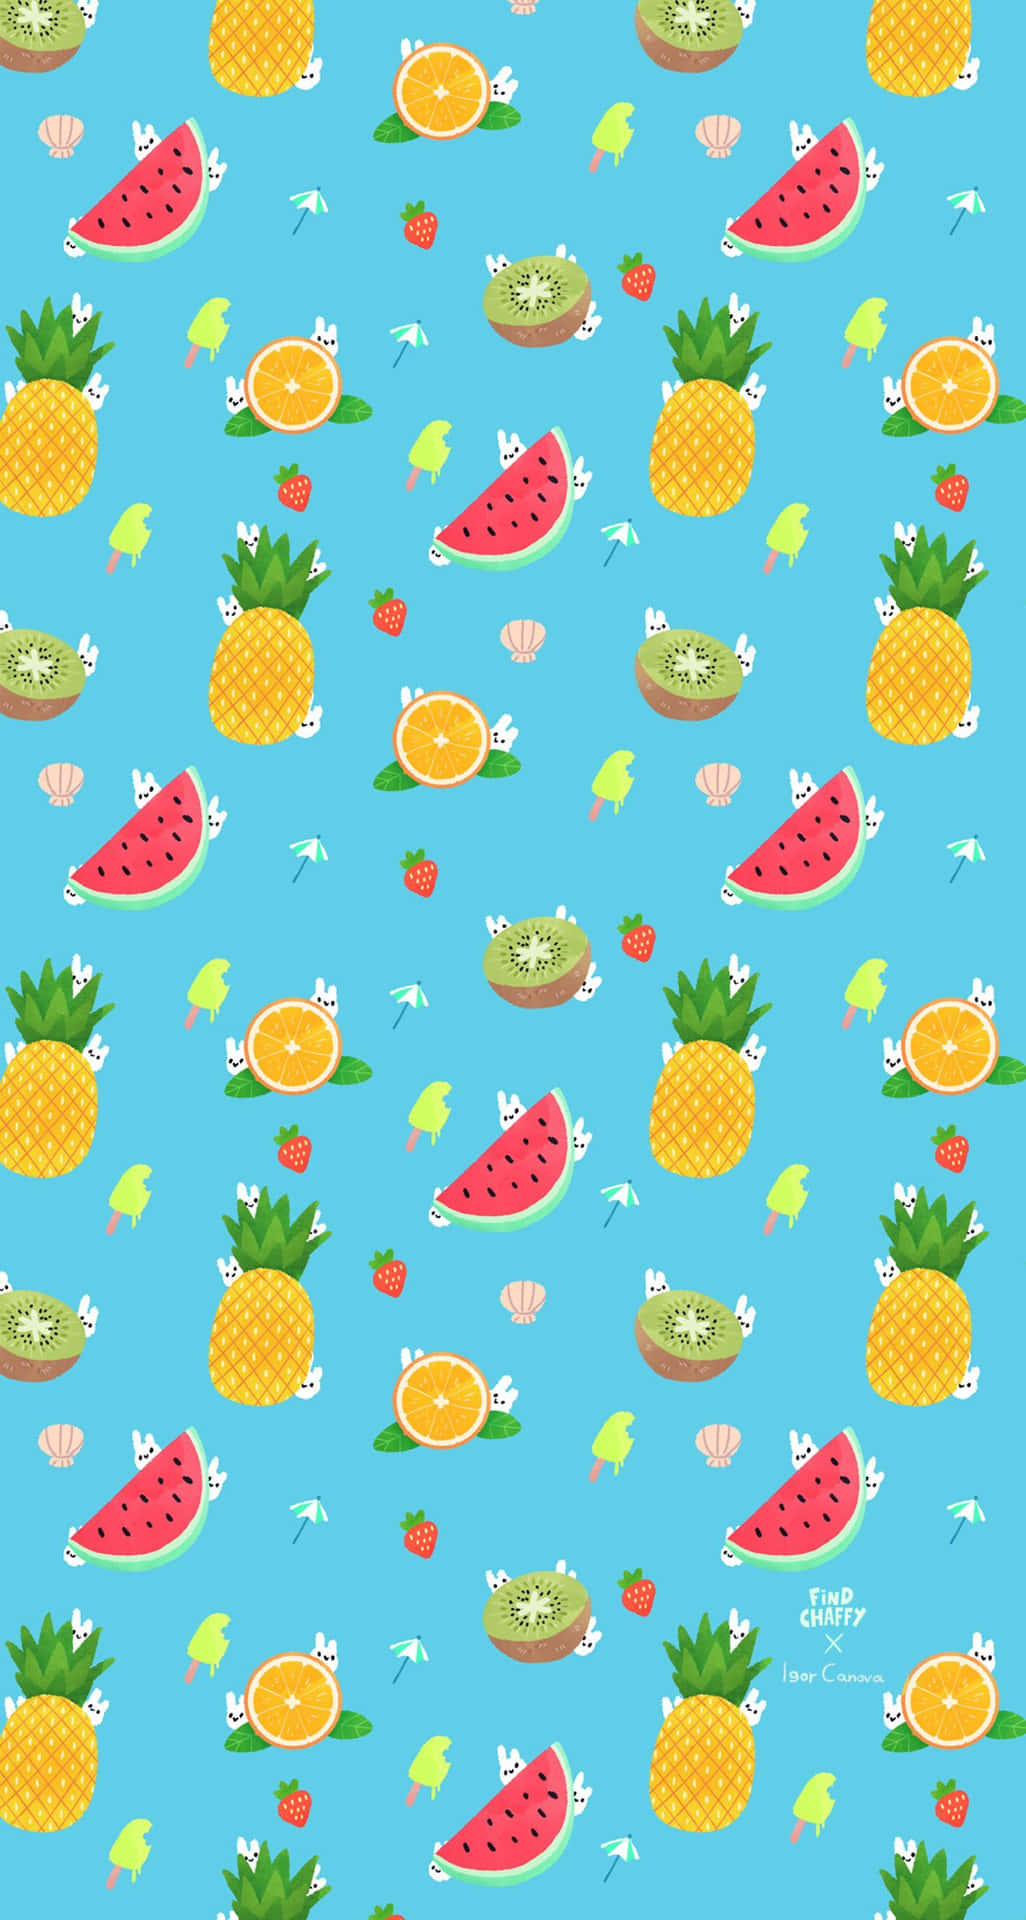 Hand Painted Colorful Summer Fruit Background Wallpaper Image For Free  Download  Pngtree